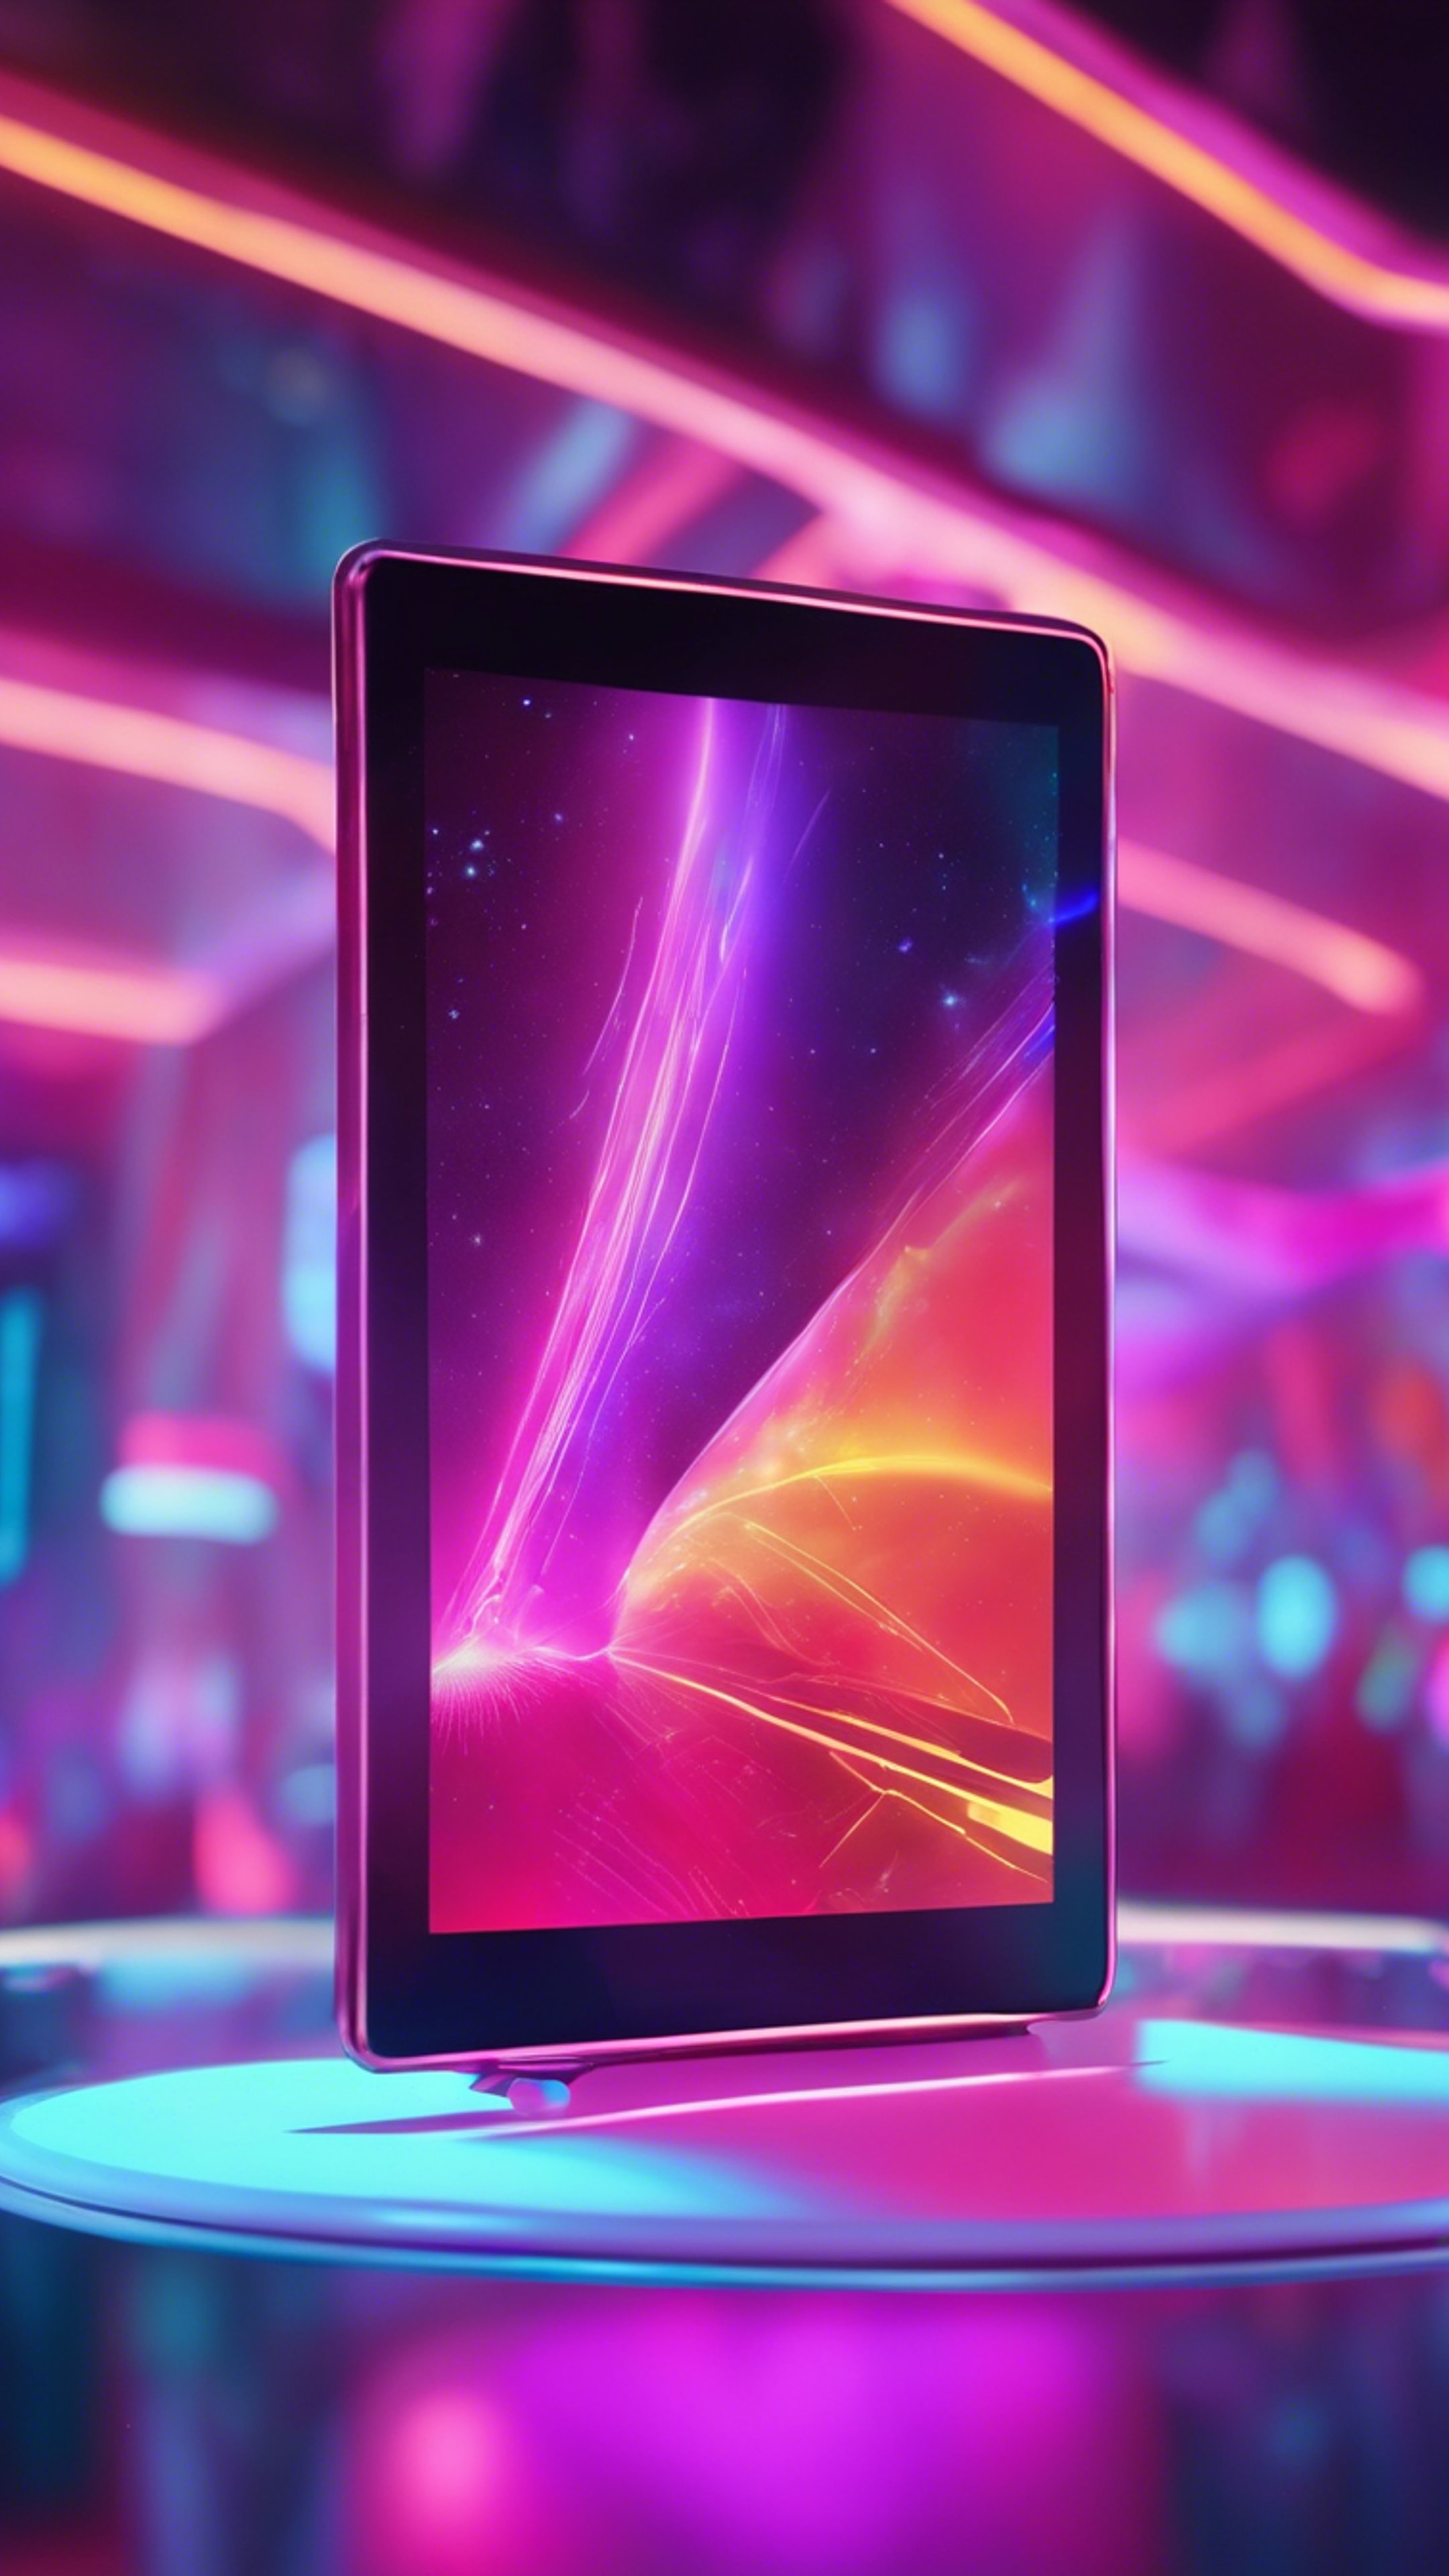 An ultra-modern tablet with a holographic touch screen floating in a futuristic, vividly colored neon environment. Дэлгэцийн зураг[25bfd648fdfb4eaf80d5]